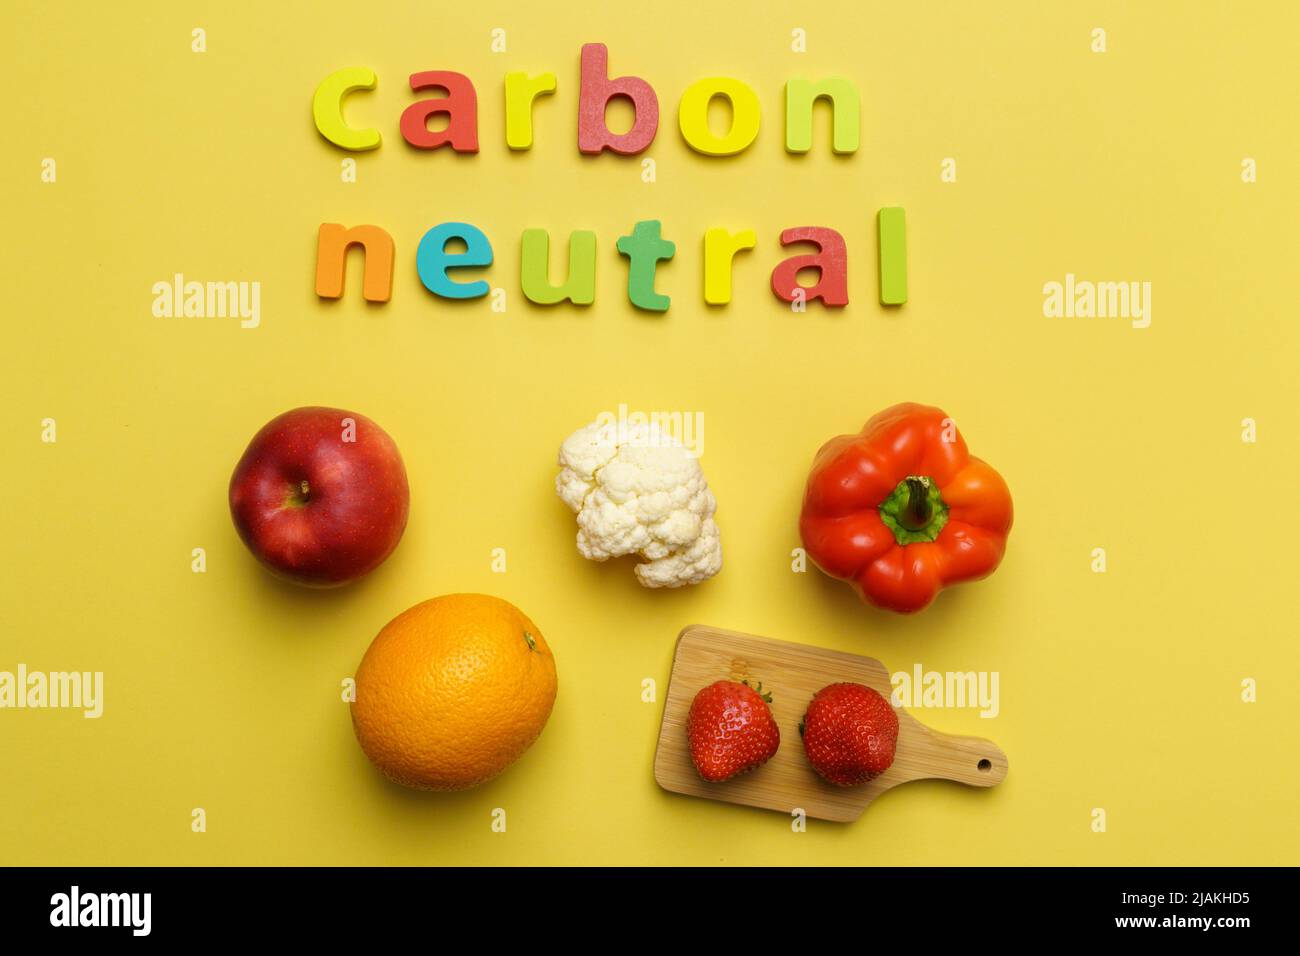 Healthy food natural vegetables in with inscription carbon neutral. Top view Stock Photo